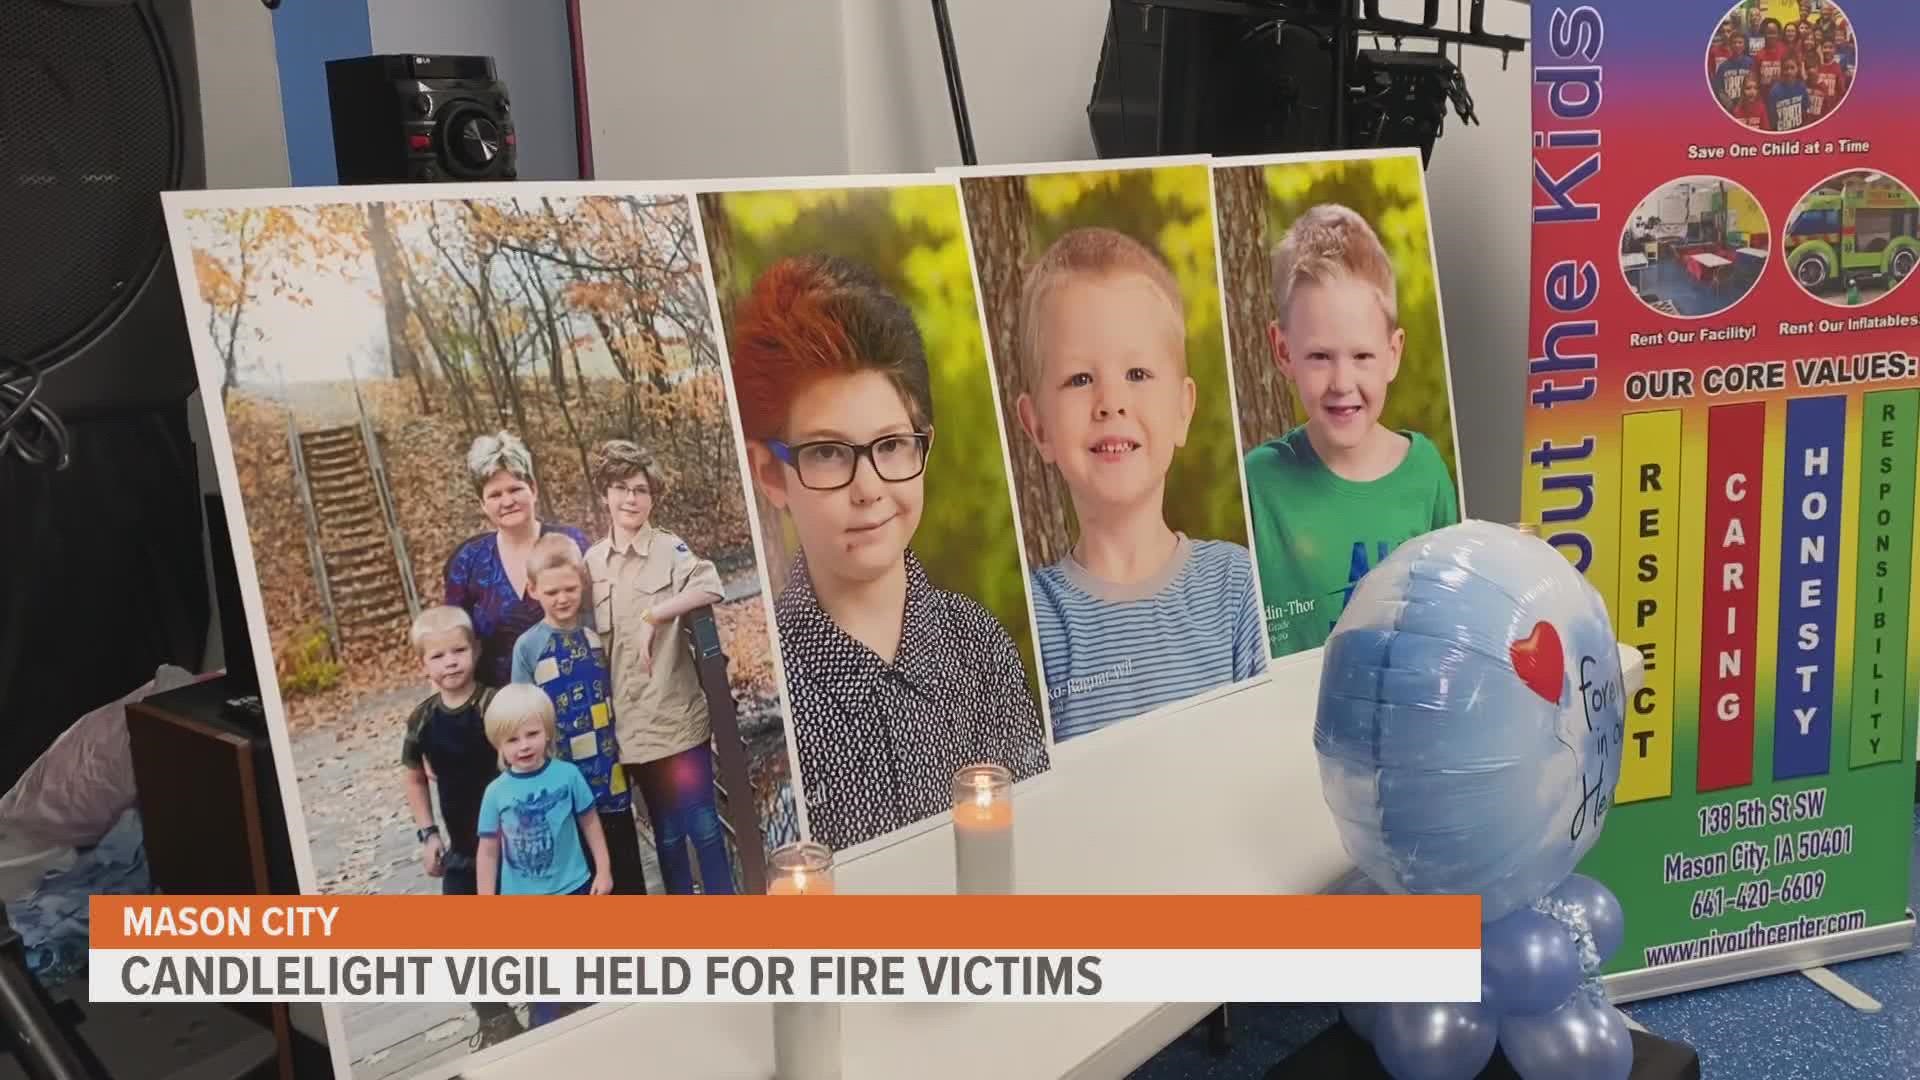 The Mason City community gathered at the North Iowa Youth Center to honor Phoenix, Draco, Odin and John Mcluer, who were all under 13 years old.